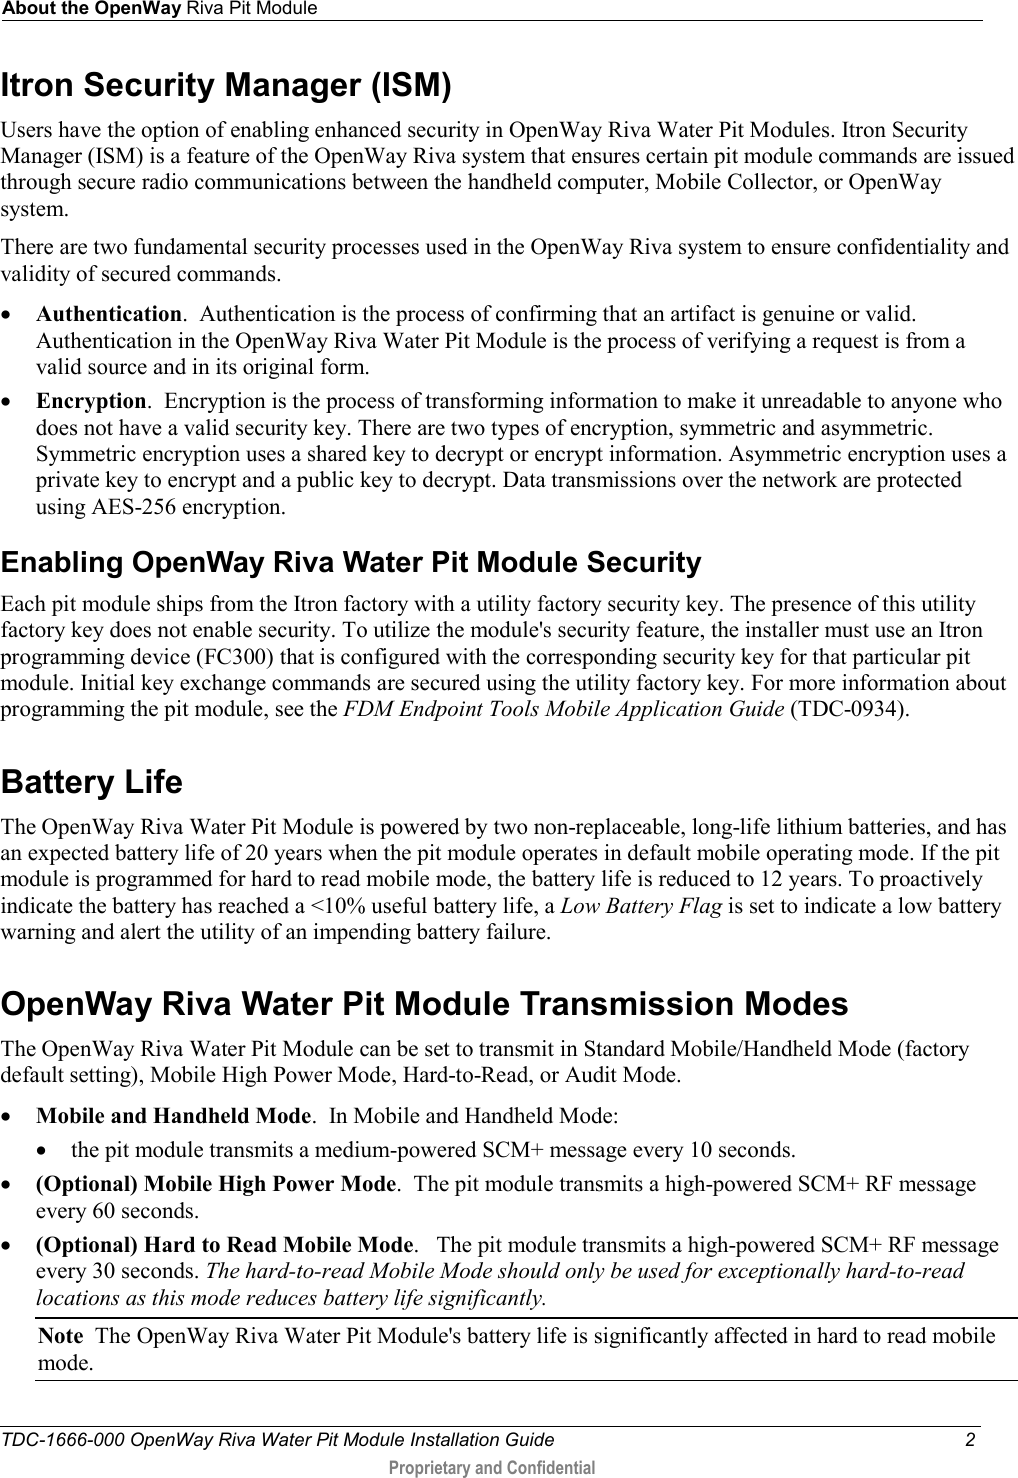 About the OpenWay Riva Pit Module  TDC-1666-000 OpenWay Riva Water Pit Module Installation Guide  2  Proprietary and Confidential    Itron Security Manager (ISM) Users have the option of enabling enhanced security in OpenWay Riva Water Pit Modules. Itron Security Manager (ISM) is a feature of the OpenWay Riva system that ensures certain pit module commands are issued through secure radio communications between the handheld computer, Mobile Collector, or OpenWay system.  There are two fundamental security processes used in the OpenWay Riva system to ensure confidentiality and validity of secured commands. • Authentication.  Authentication is the process of confirming that an artifact is genuine or valid. Authentication in the OpenWay Riva Water Pit Module is the process of verifying a request is from a valid source and in its original form. • Encryption.  Encryption is the process of transforming information to make it unreadable to anyone who does not have a valid security key. There are two types of encryption, symmetric and asymmetric. Symmetric encryption uses a shared key to decrypt or encrypt information. Asymmetric encryption uses a private key to encrypt and a public key to decrypt. Data transmissions over the network are protected using AES-256 encryption. Enabling OpenWay Riva Water Pit Module Security Each pit module ships from the Itron factory with a utility factory security key. The presence of this utility factory key does not enable security. To utilize the module&apos;s security feature, the installer must use an Itron programming device (FC300) that is configured with the corresponding security key for that particular pit module. Initial key exchange commands are secured using the utility factory key. For more information about programming the pit module, see the FDM Endpoint Tools Mobile Application Guide (TDC-0934).  Battery Life The OpenWay Riva Water Pit Module is powered by two non-replaceable, long-life lithium batteries, and has an expected battery life of 20 years when the pit module operates in default mobile operating mode. If the pit module is programmed for hard to read mobile mode, the battery life is reduced to 12 years. To proactively indicate the battery has reached a &lt;10% useful battery life, a Low Battery Flag is set to indicate a low battery warning and alert the utility of an impending battery failure.  OpenWay Riva Water Pit Module Transmission Modes The OpenWay Riva Water Pit Module can be set to transmit in Standard Mobile/Handheld Mode (factory default setting), Mobile High Power Mode, Hard-to-Read, or Audit Mode.  • Mobile and Handheld Mode.  In Mobile and Handheld Mode: • the pit module transmits a medium-powered SCM+ message every 10 seconds. • (Optional) Mobile High Power Mode.  The pit module transmits a high-powered SCM+ RF message every 60 seconds.   • (Optional) Hard to Read Mobile Mode.   The pit module transmits a high-powered SCM+ RF message every 30 seconds. The hard-to-read Mobile Mode should only be used for exceptionally hard-to-read locations as this mode reduces battery life significantly.  Note  The OpenWay Riva Water Pit Module&apos;s battery life is significantly affected in hard to read mobile mode.  